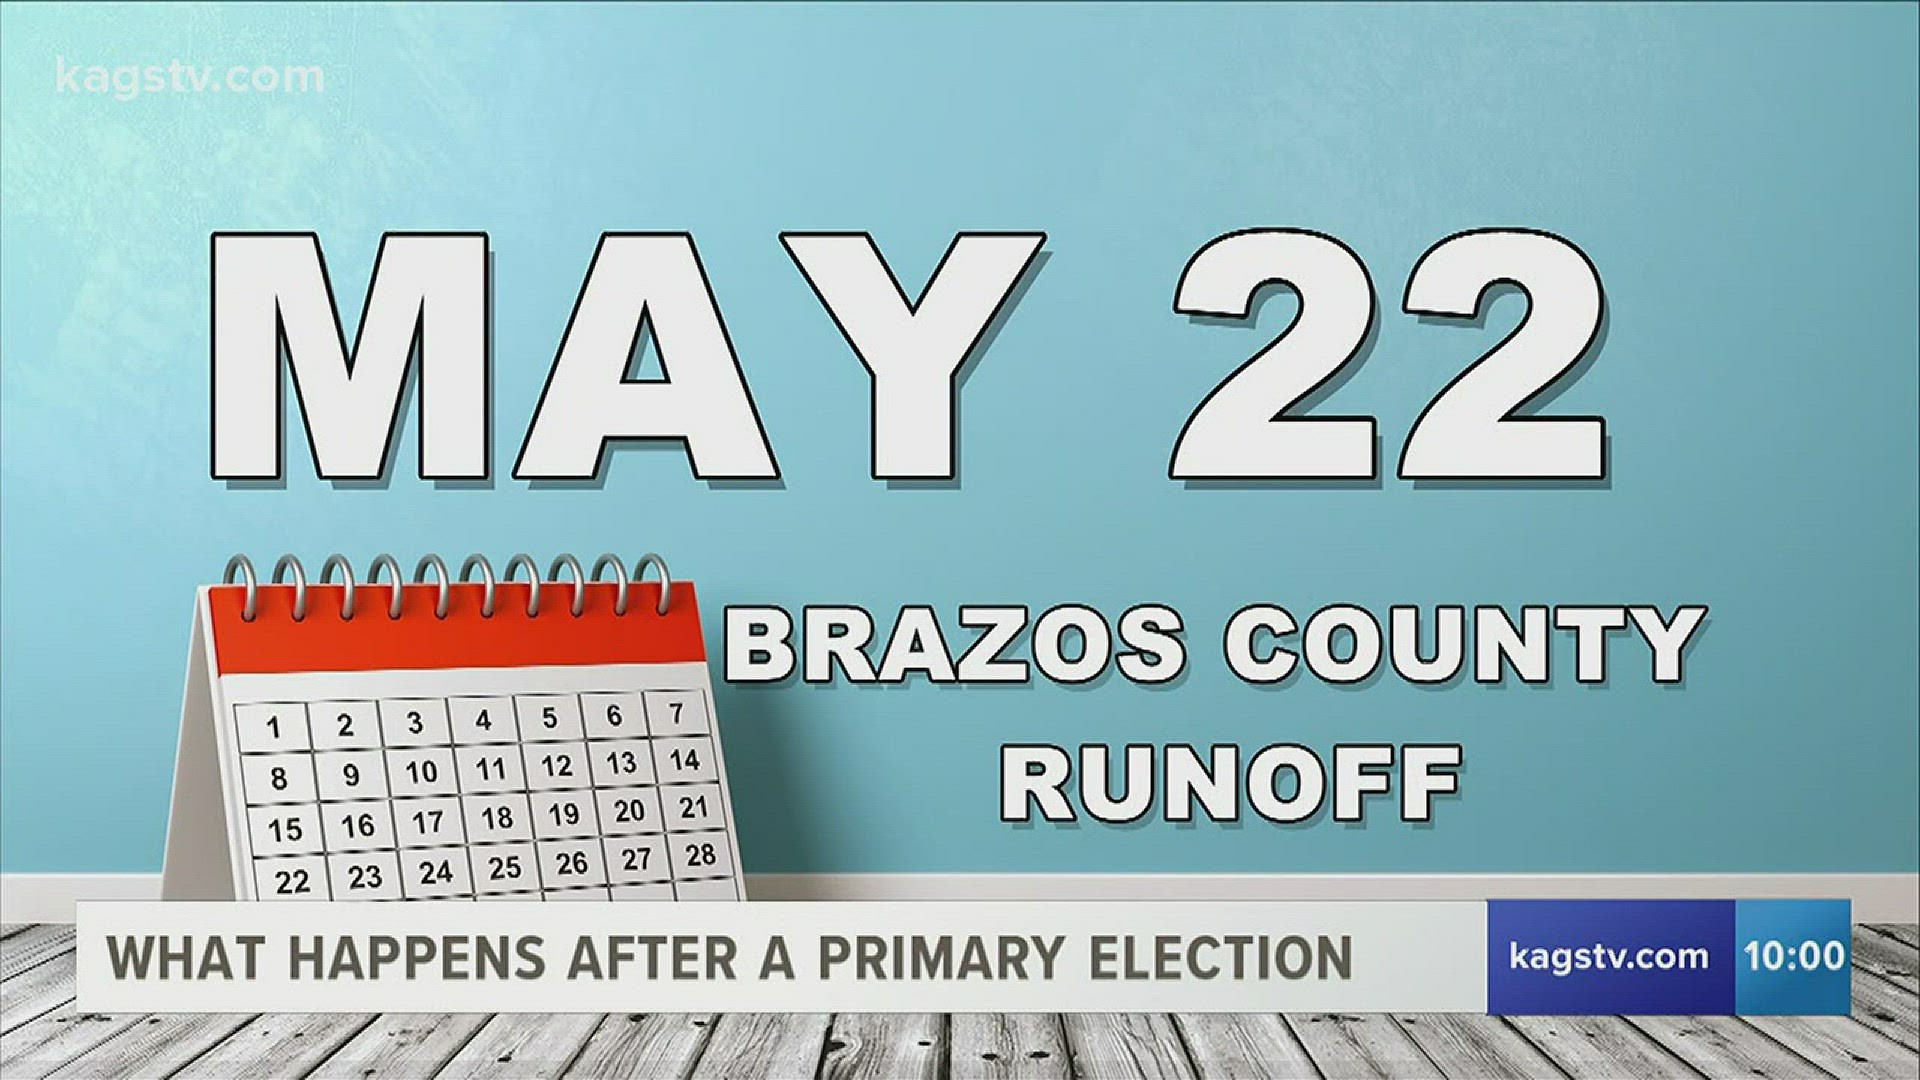 While many of us are still recovering from last nights primary elections, its not quite over yet. There are some politicians who will have to participate in a runoff in May to determine who will represent their parties in the November election.